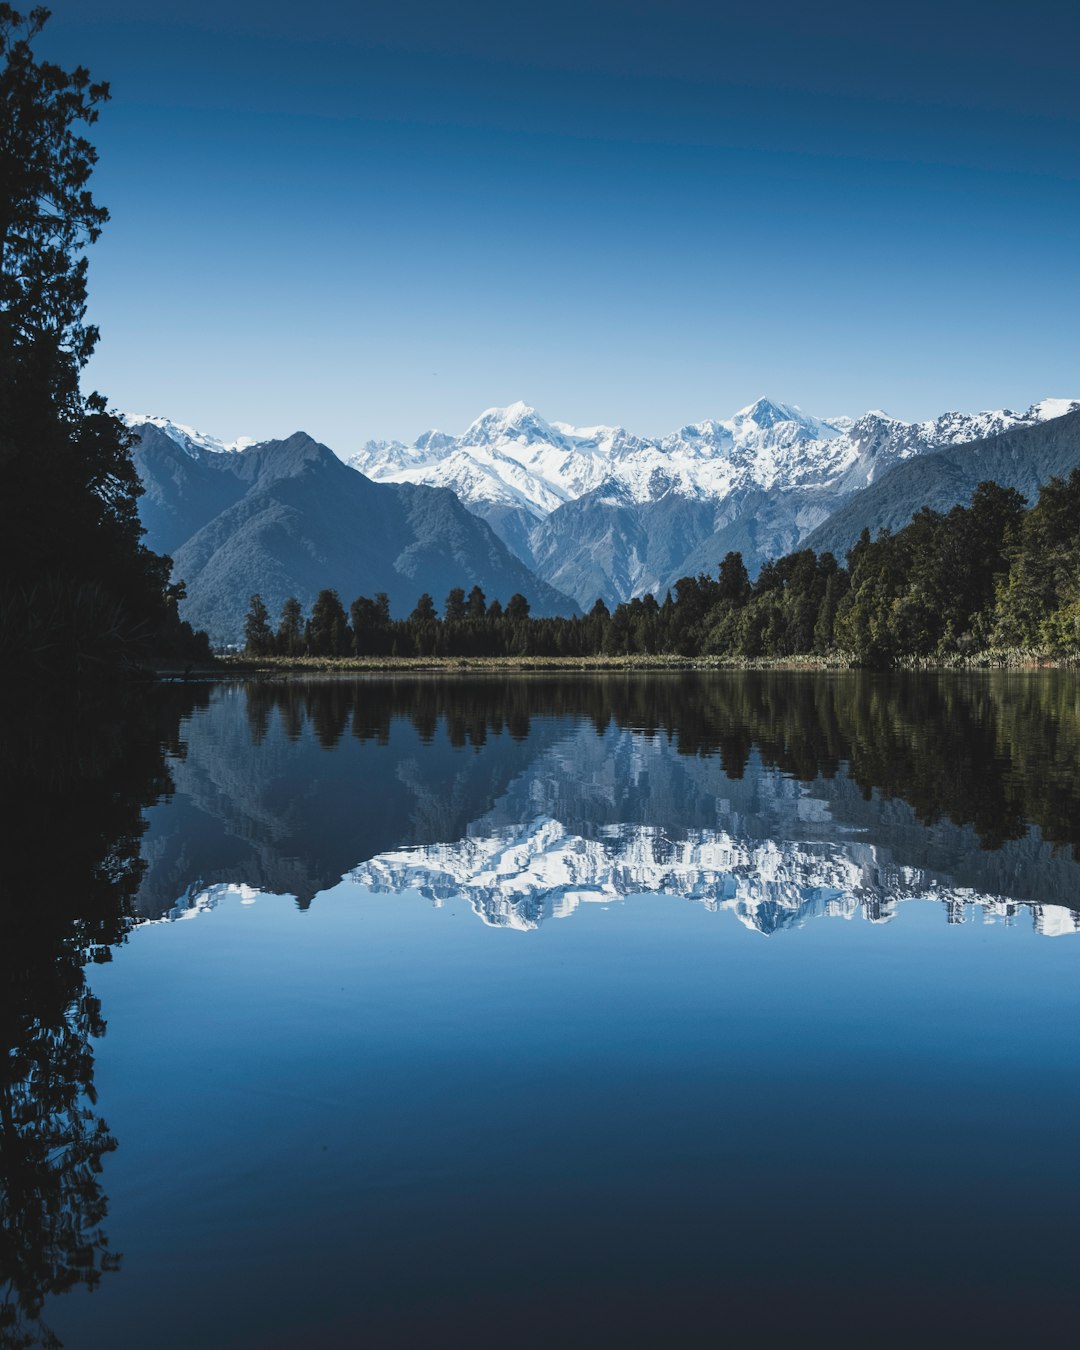 Travel Tips and Stories of Lake Matheson in New Zealand